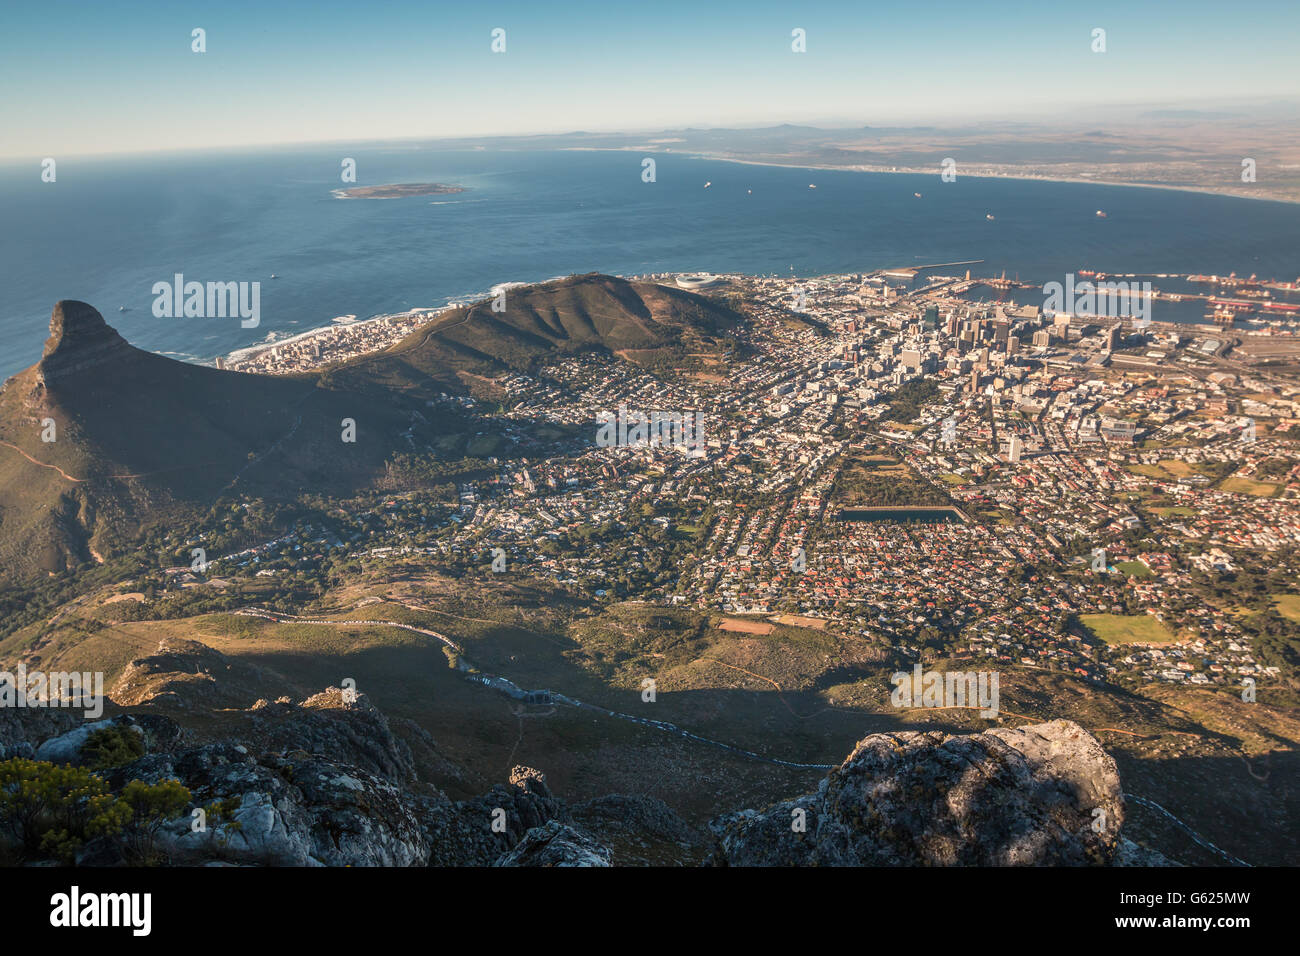 Nice View of Cape town city in South Africa Stock Photo